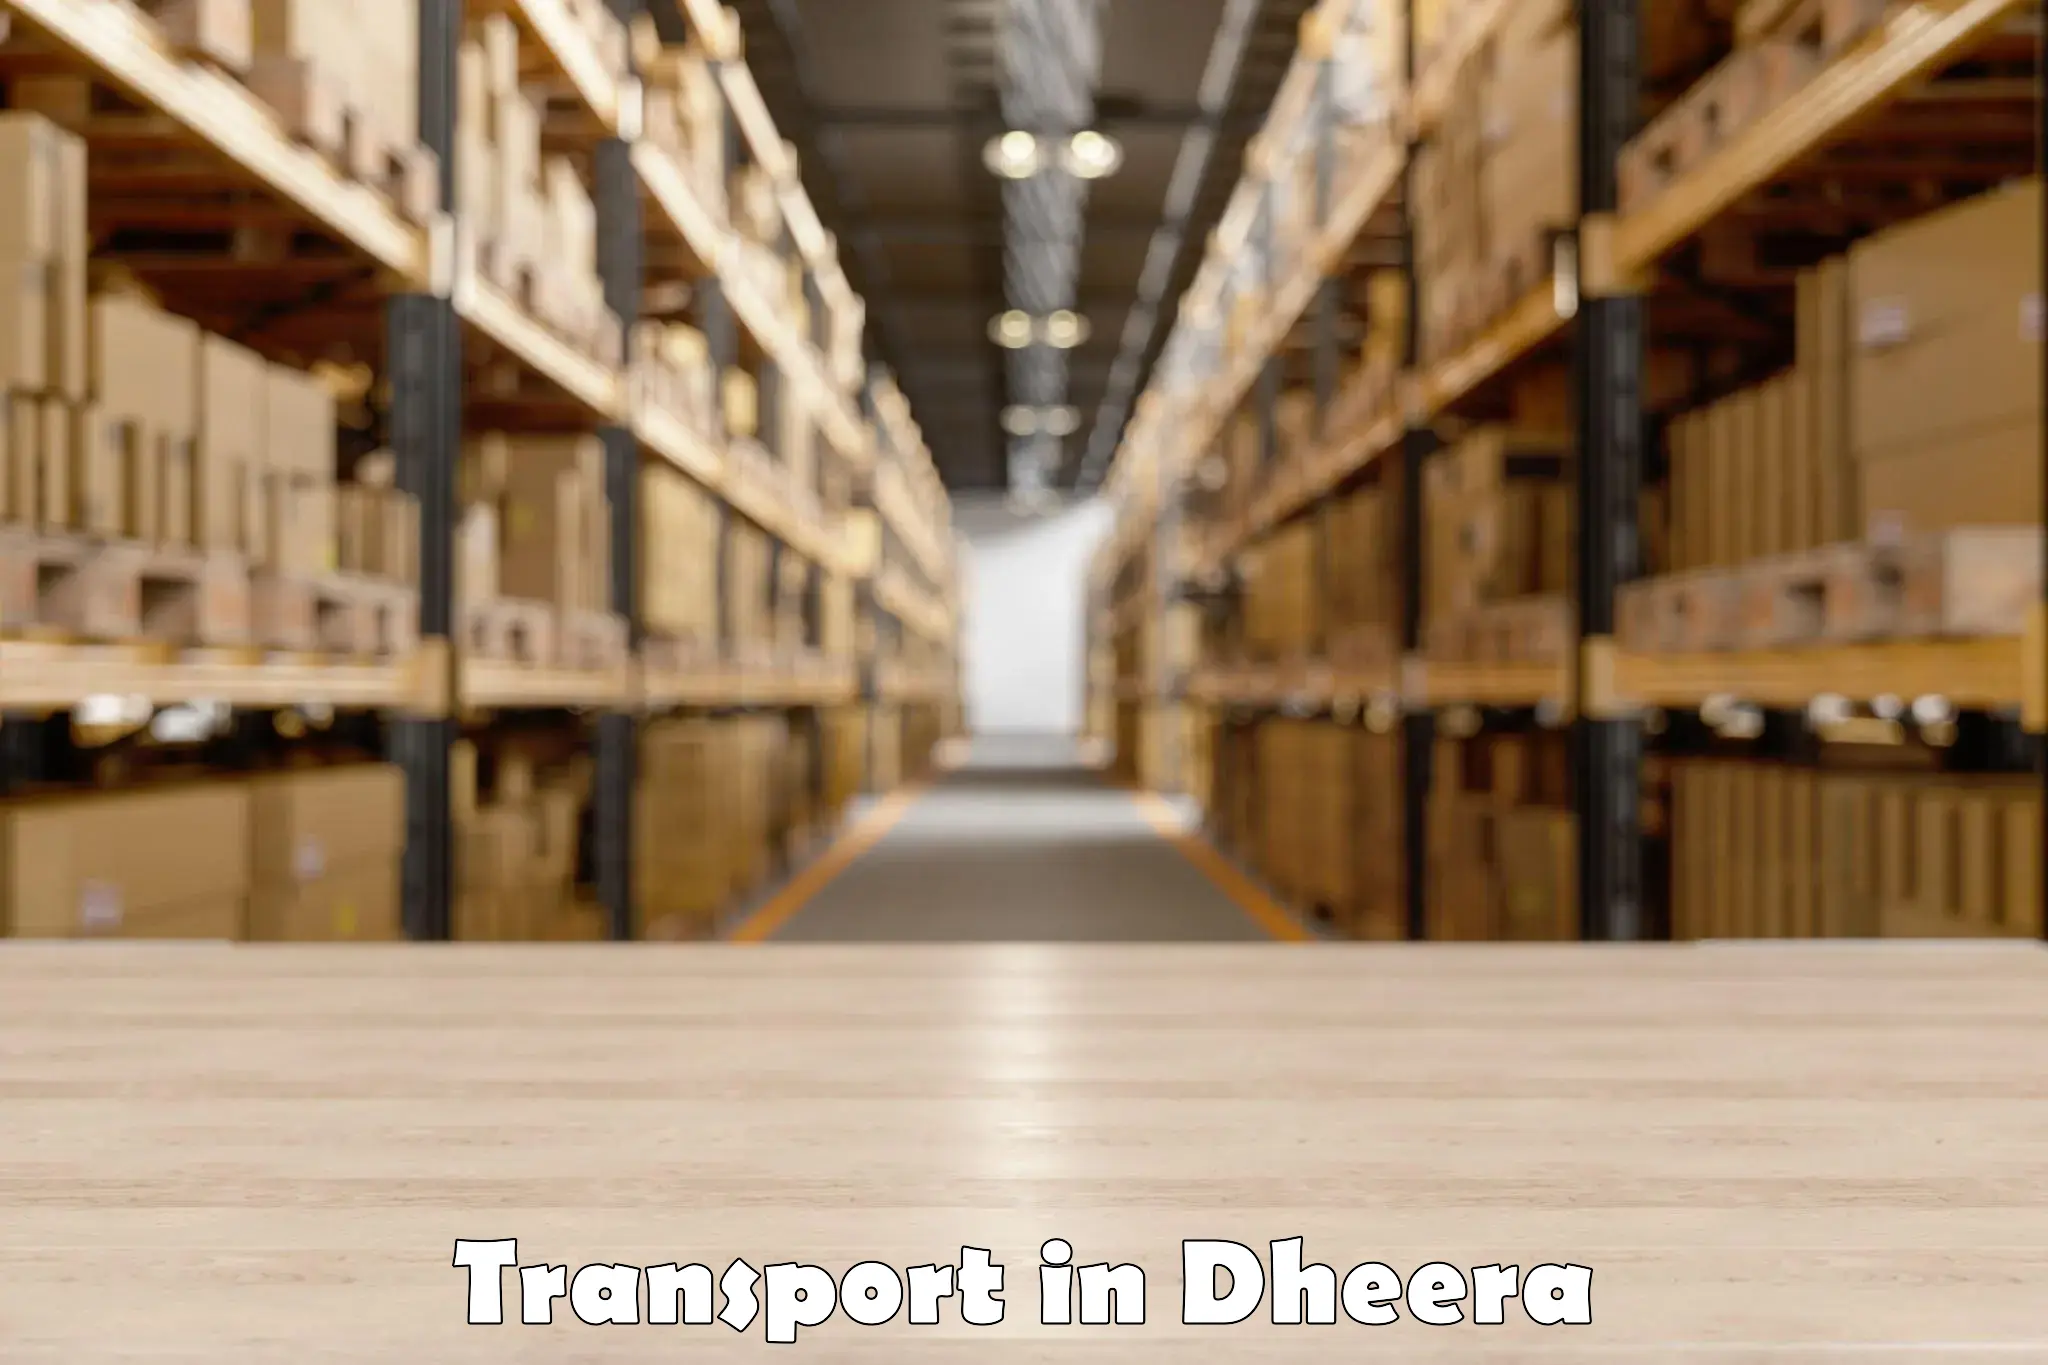 Goods transport services in Dheera